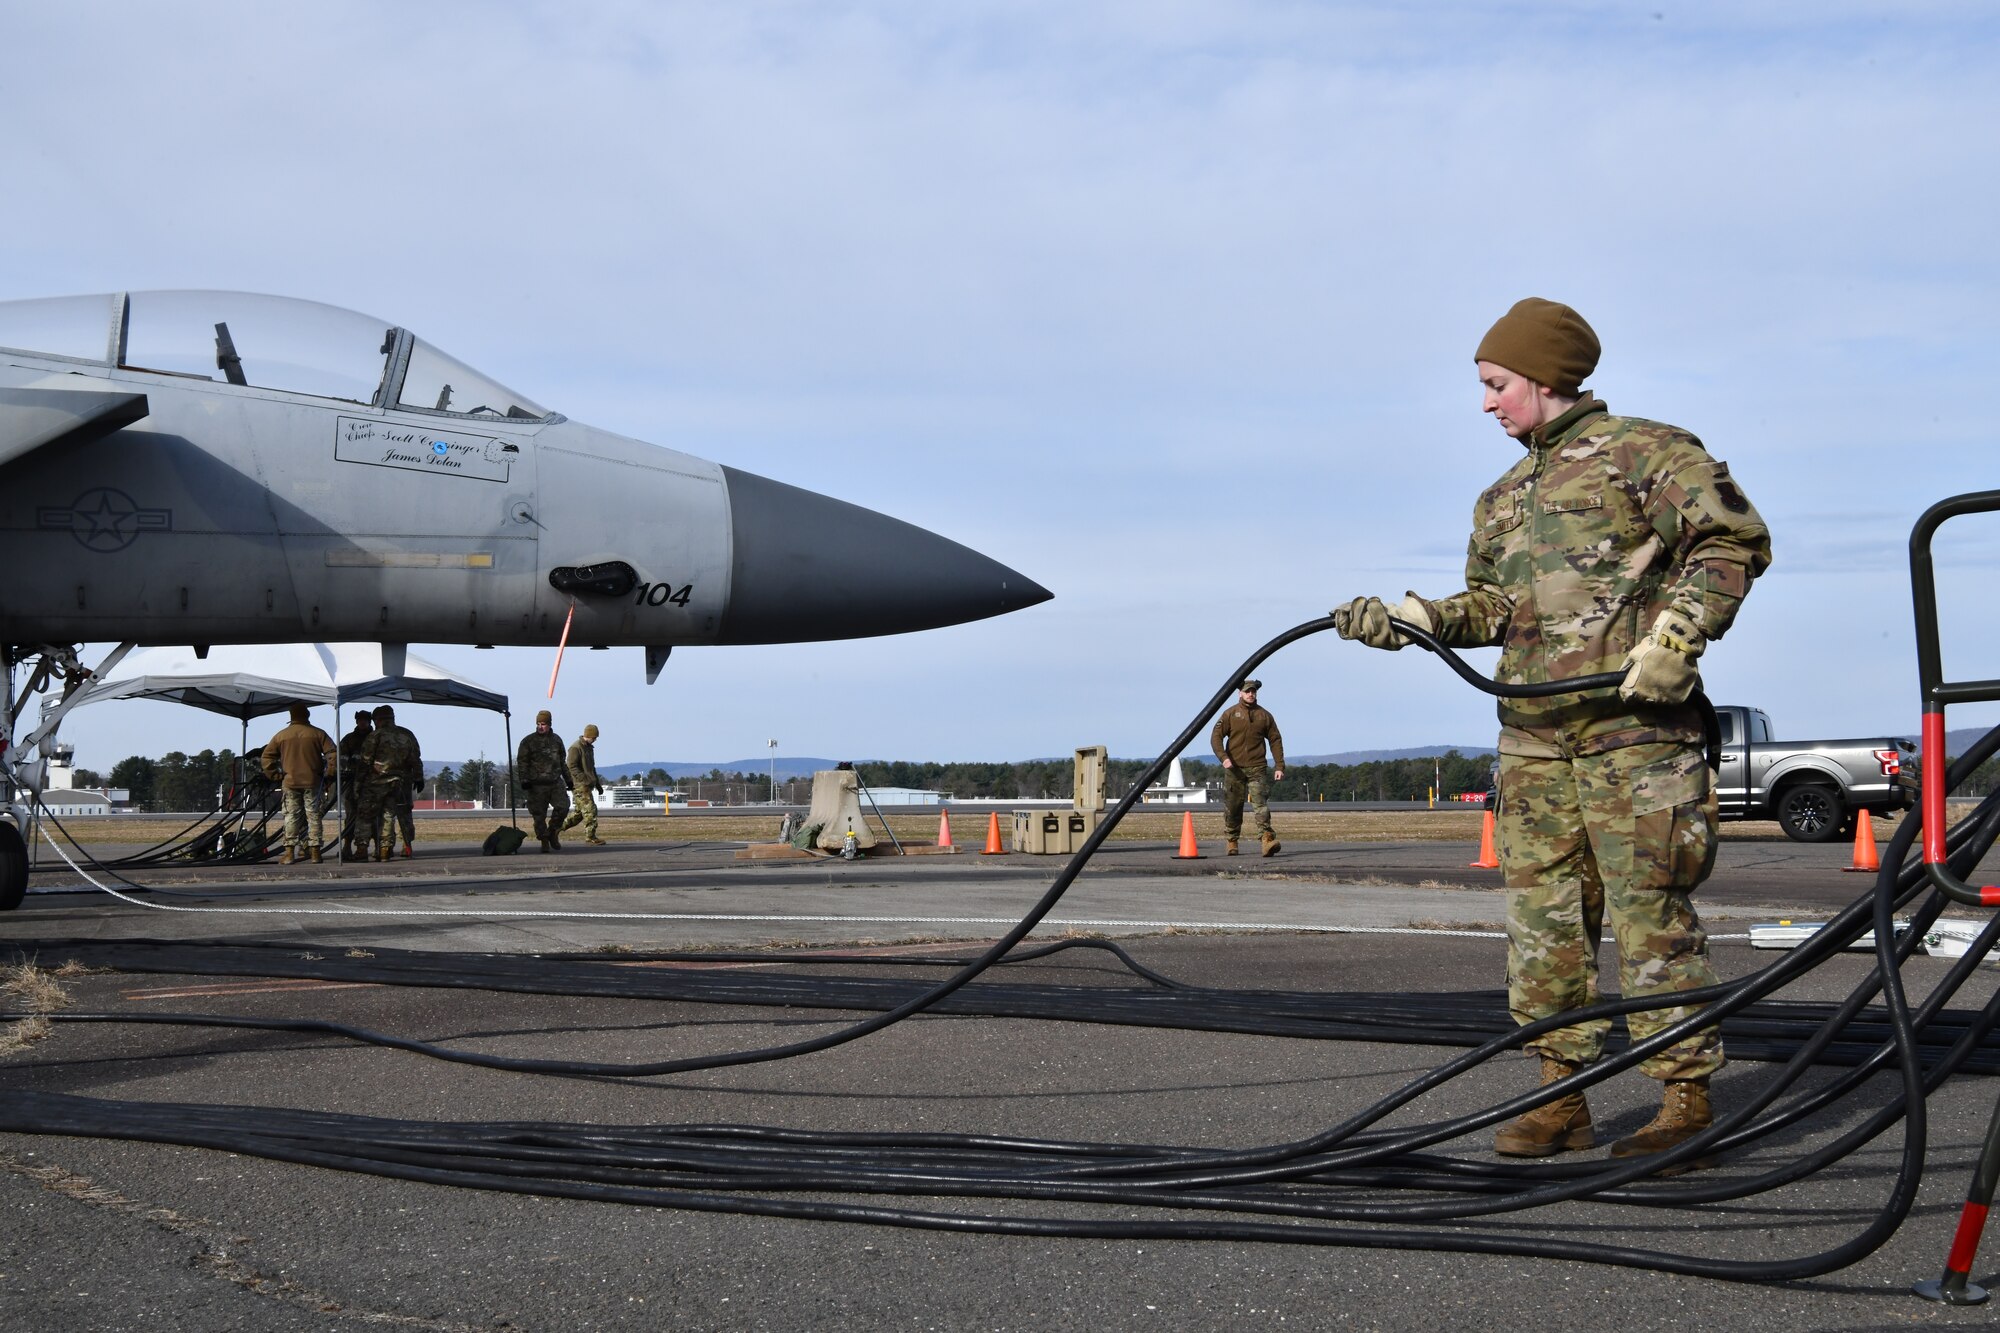 Nearly 50 Air National Guard and Air Force Reserve members from the 104th Fighter Wing, 158th Fighter Wing and 439th Air Mobility Wing completed a joint hands-on Crash, Damaged or Disabled Aircraft Recovery training at Barnes Air National Guard base, Massachusetts, April 3, 2022.